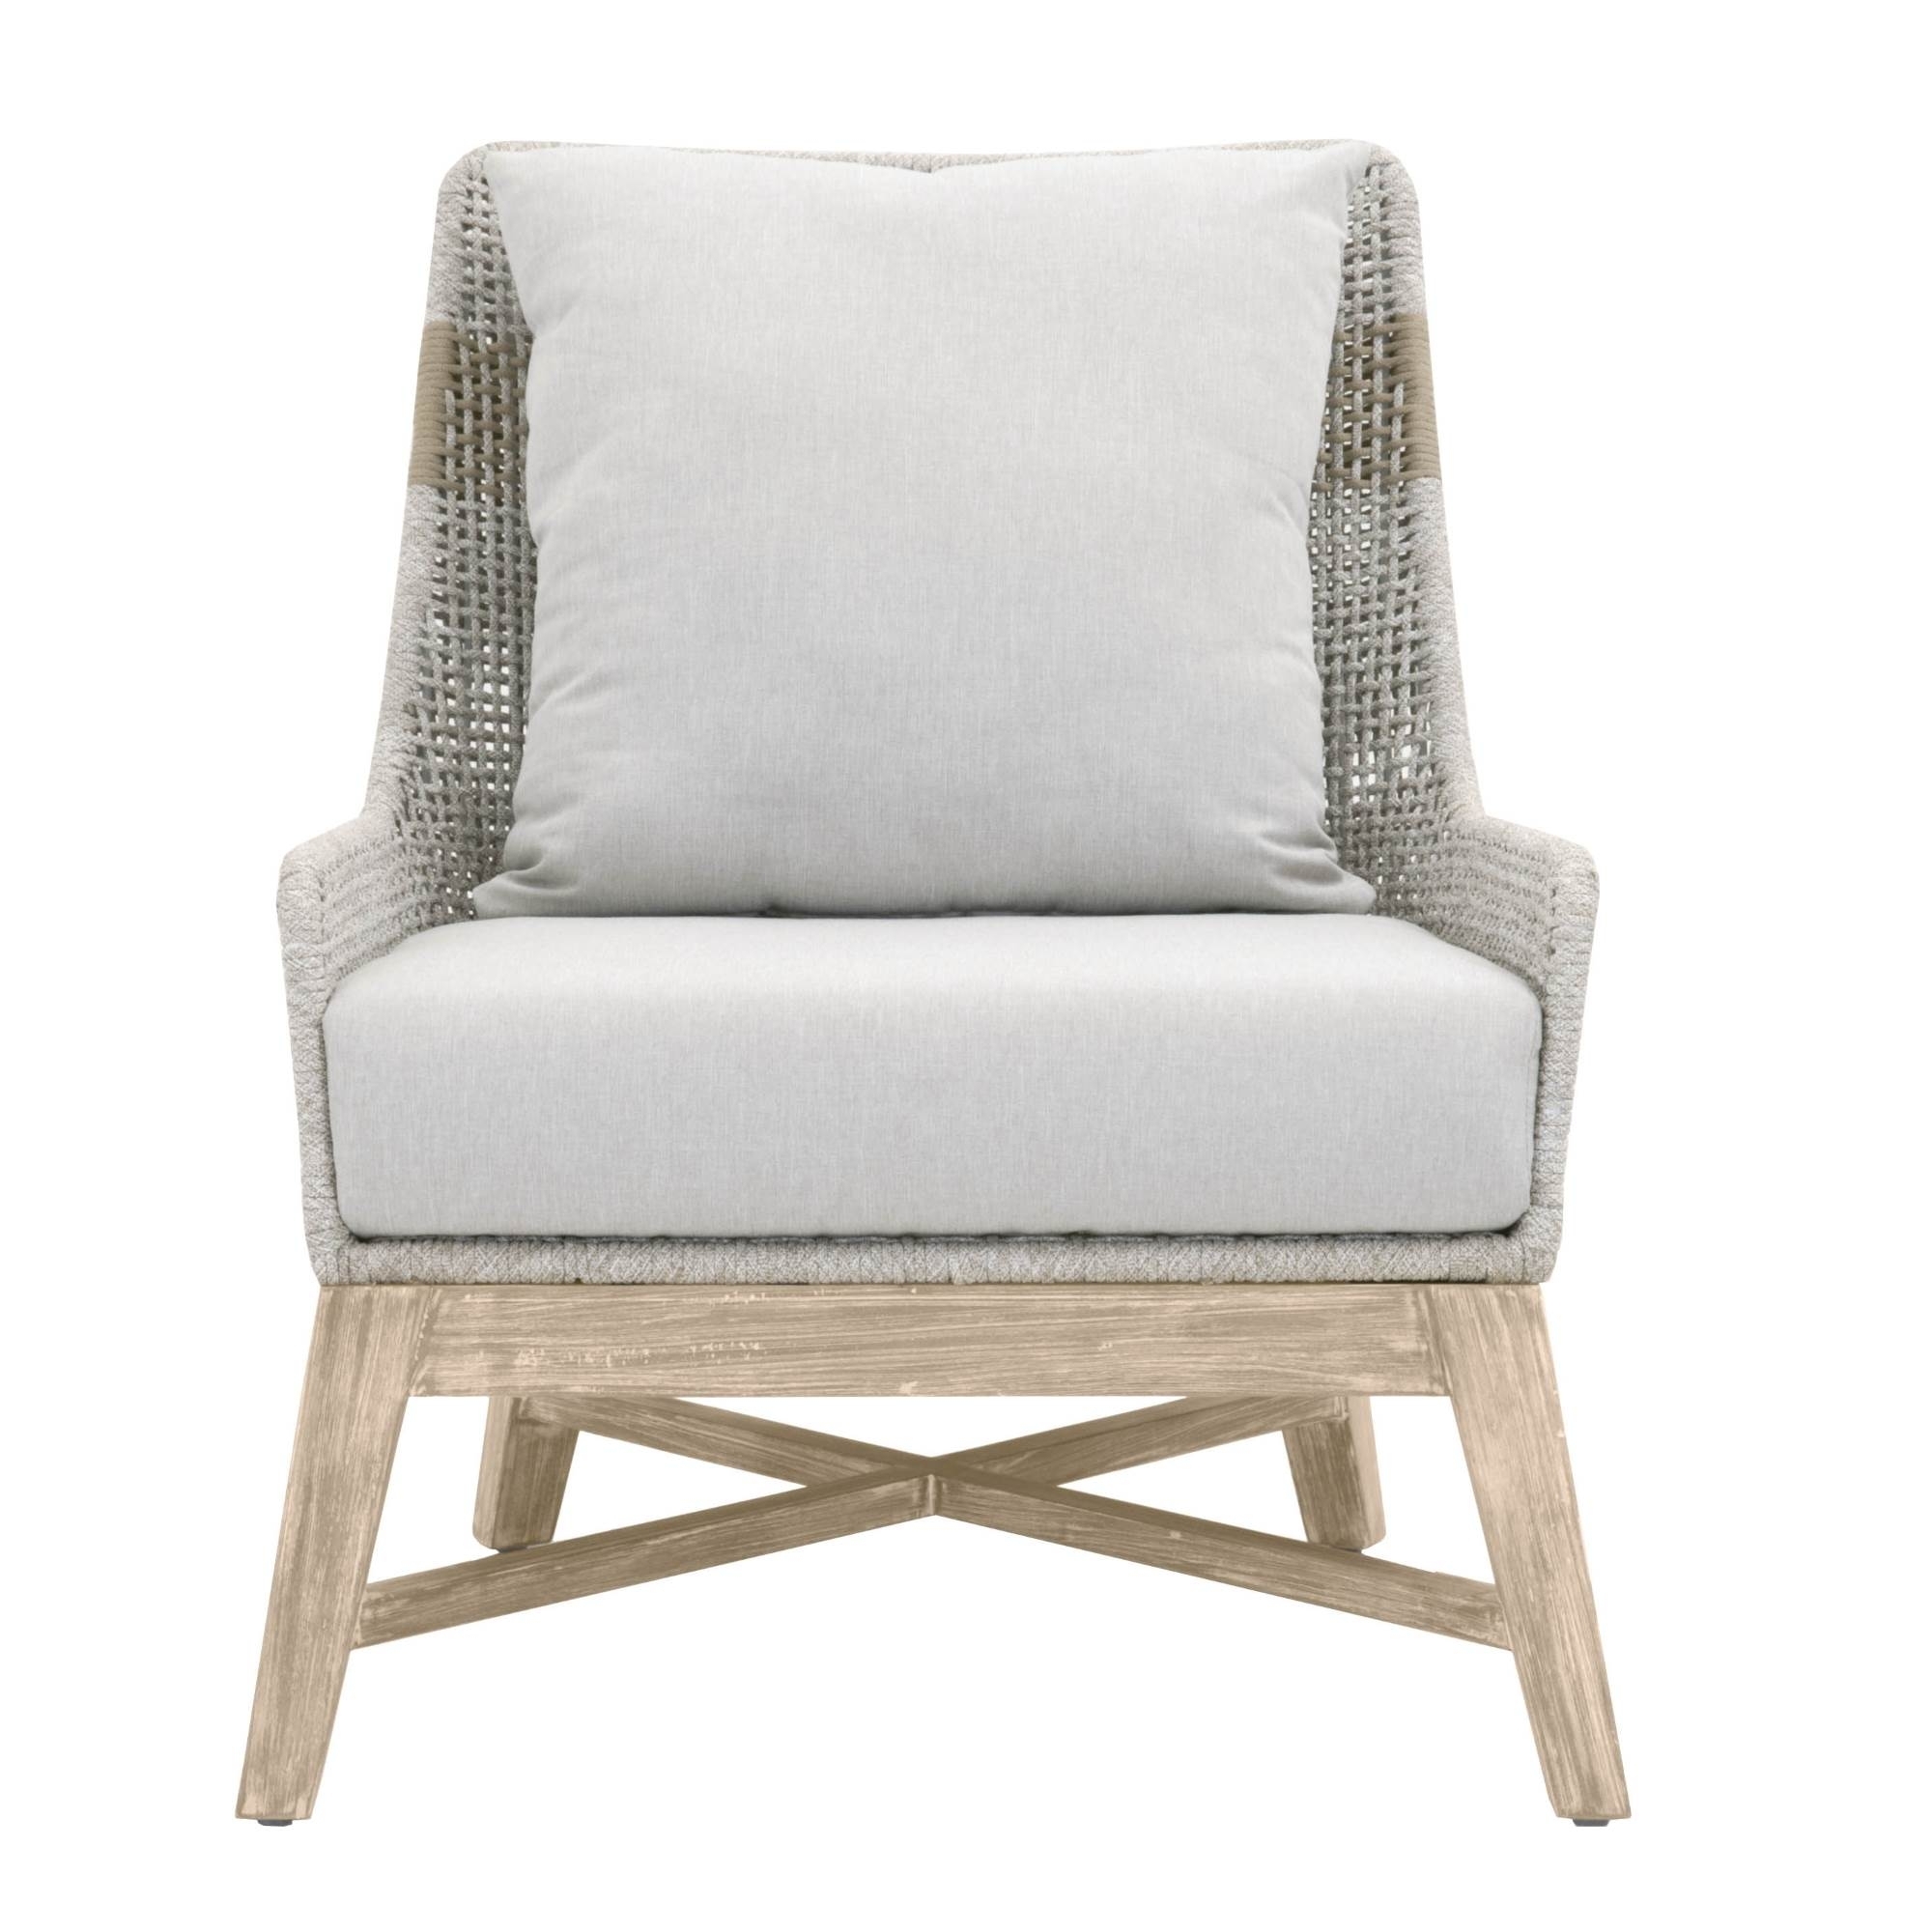 Panorama Indoor/Outdoor Club Chair, White Taupe - Image 0